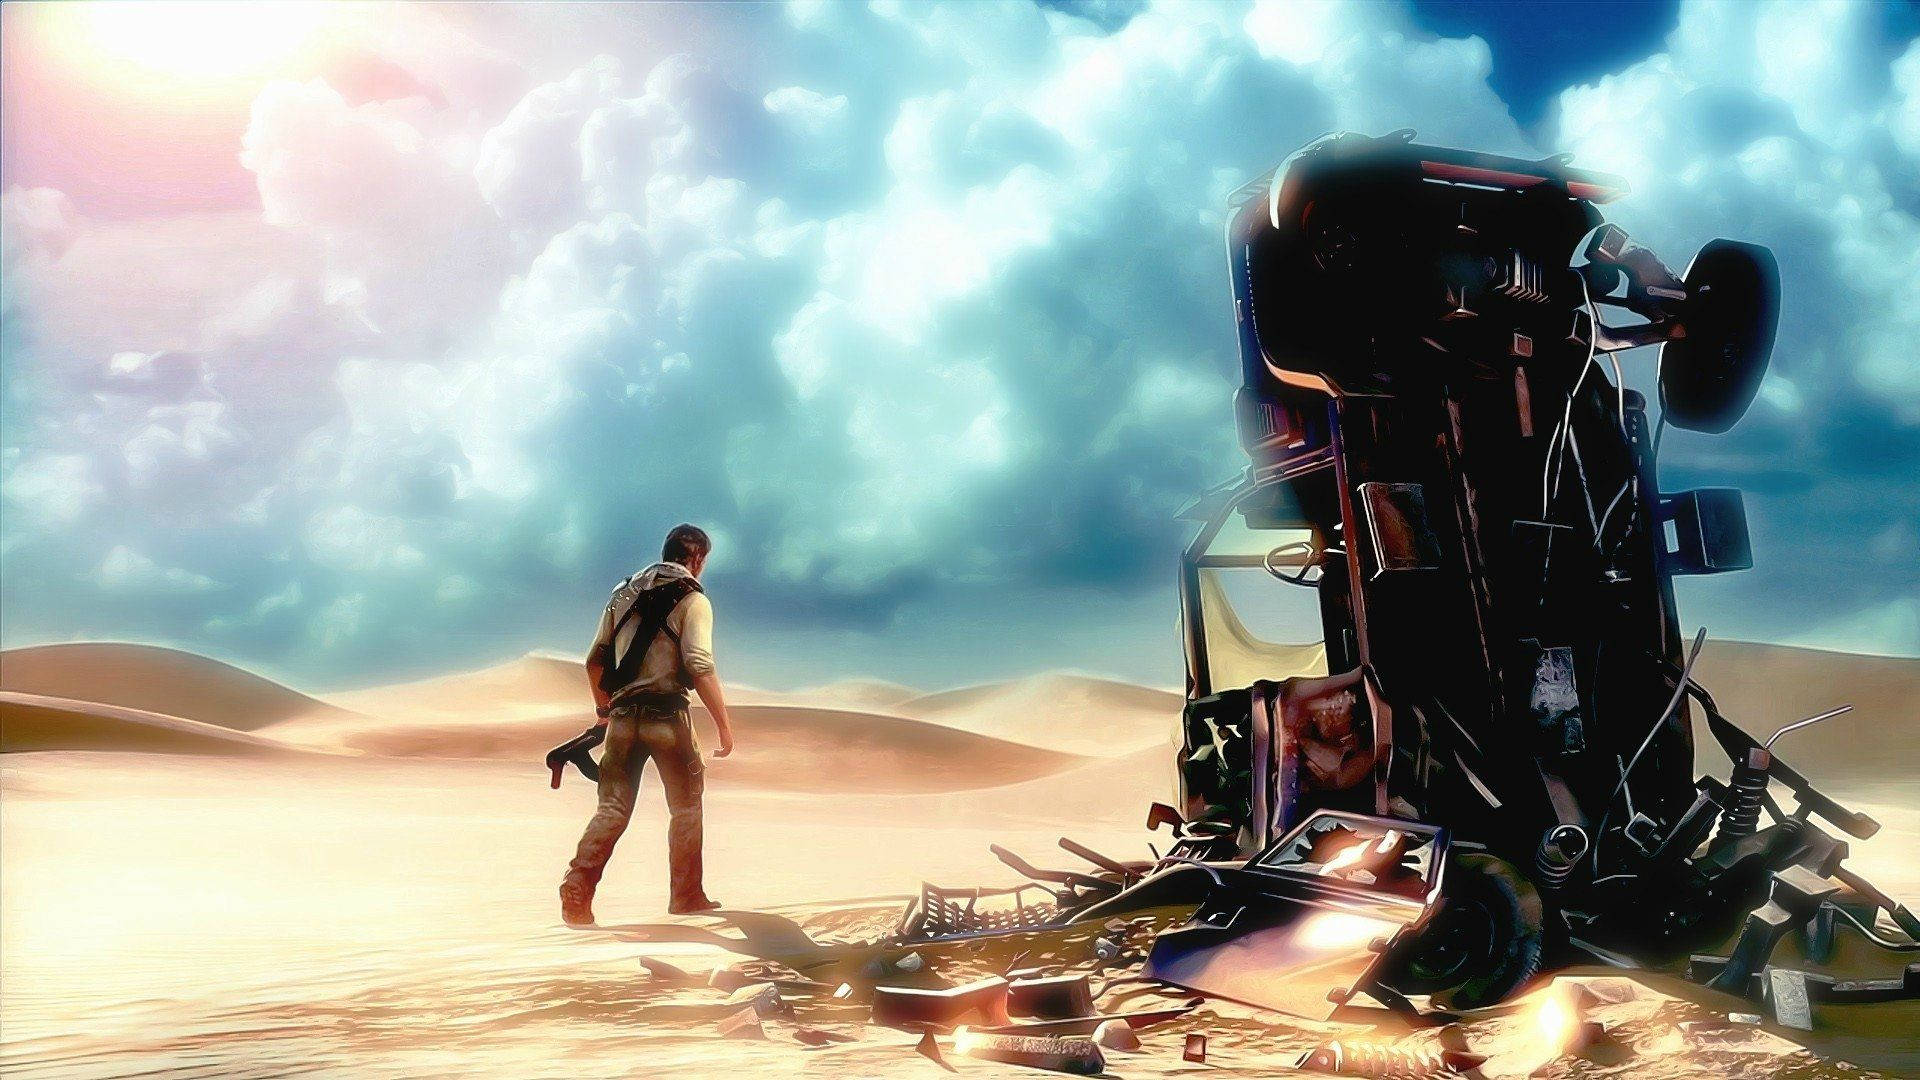 Uncharted's Protagonist Nathan Drake Next To A Crashed Car.